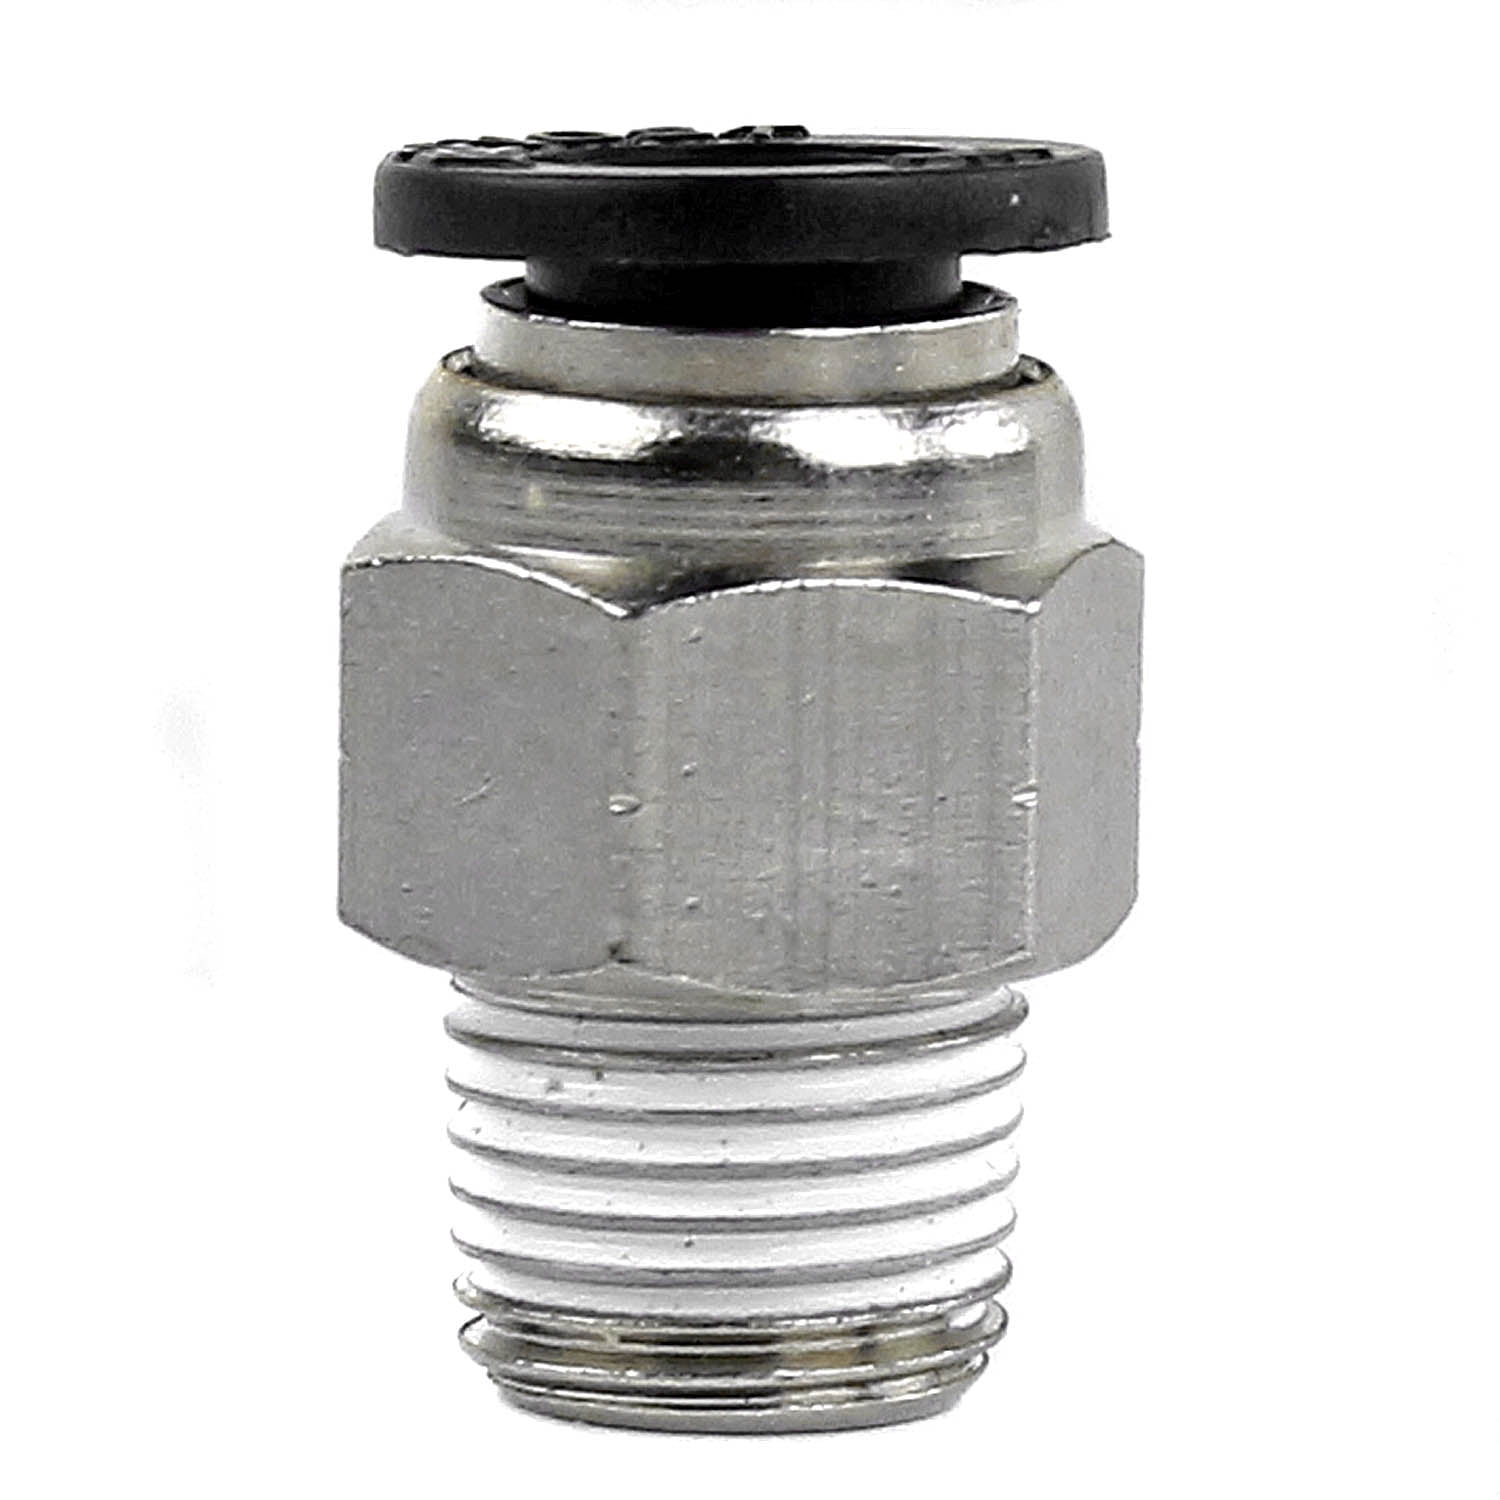 Push-to-Connect Tube Fitting Straight Adapter for 1/8" Tube OD x 1/4 NPT Female 